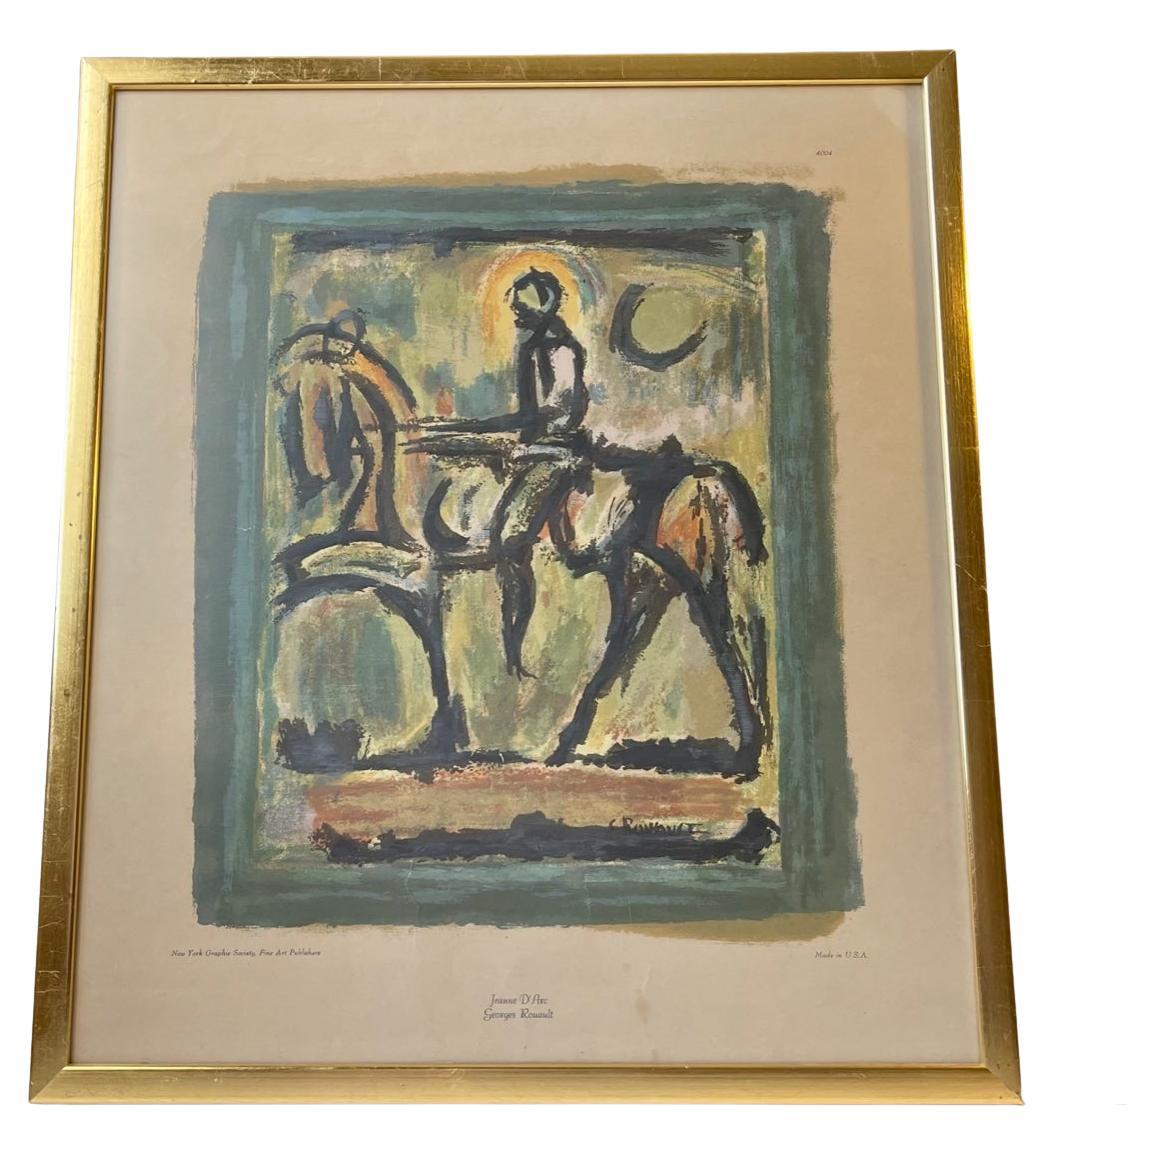 Jeanne D' Arc by Georges Rouault Lithographic Color Print, 1940s New York  For Sale at 1stDibs